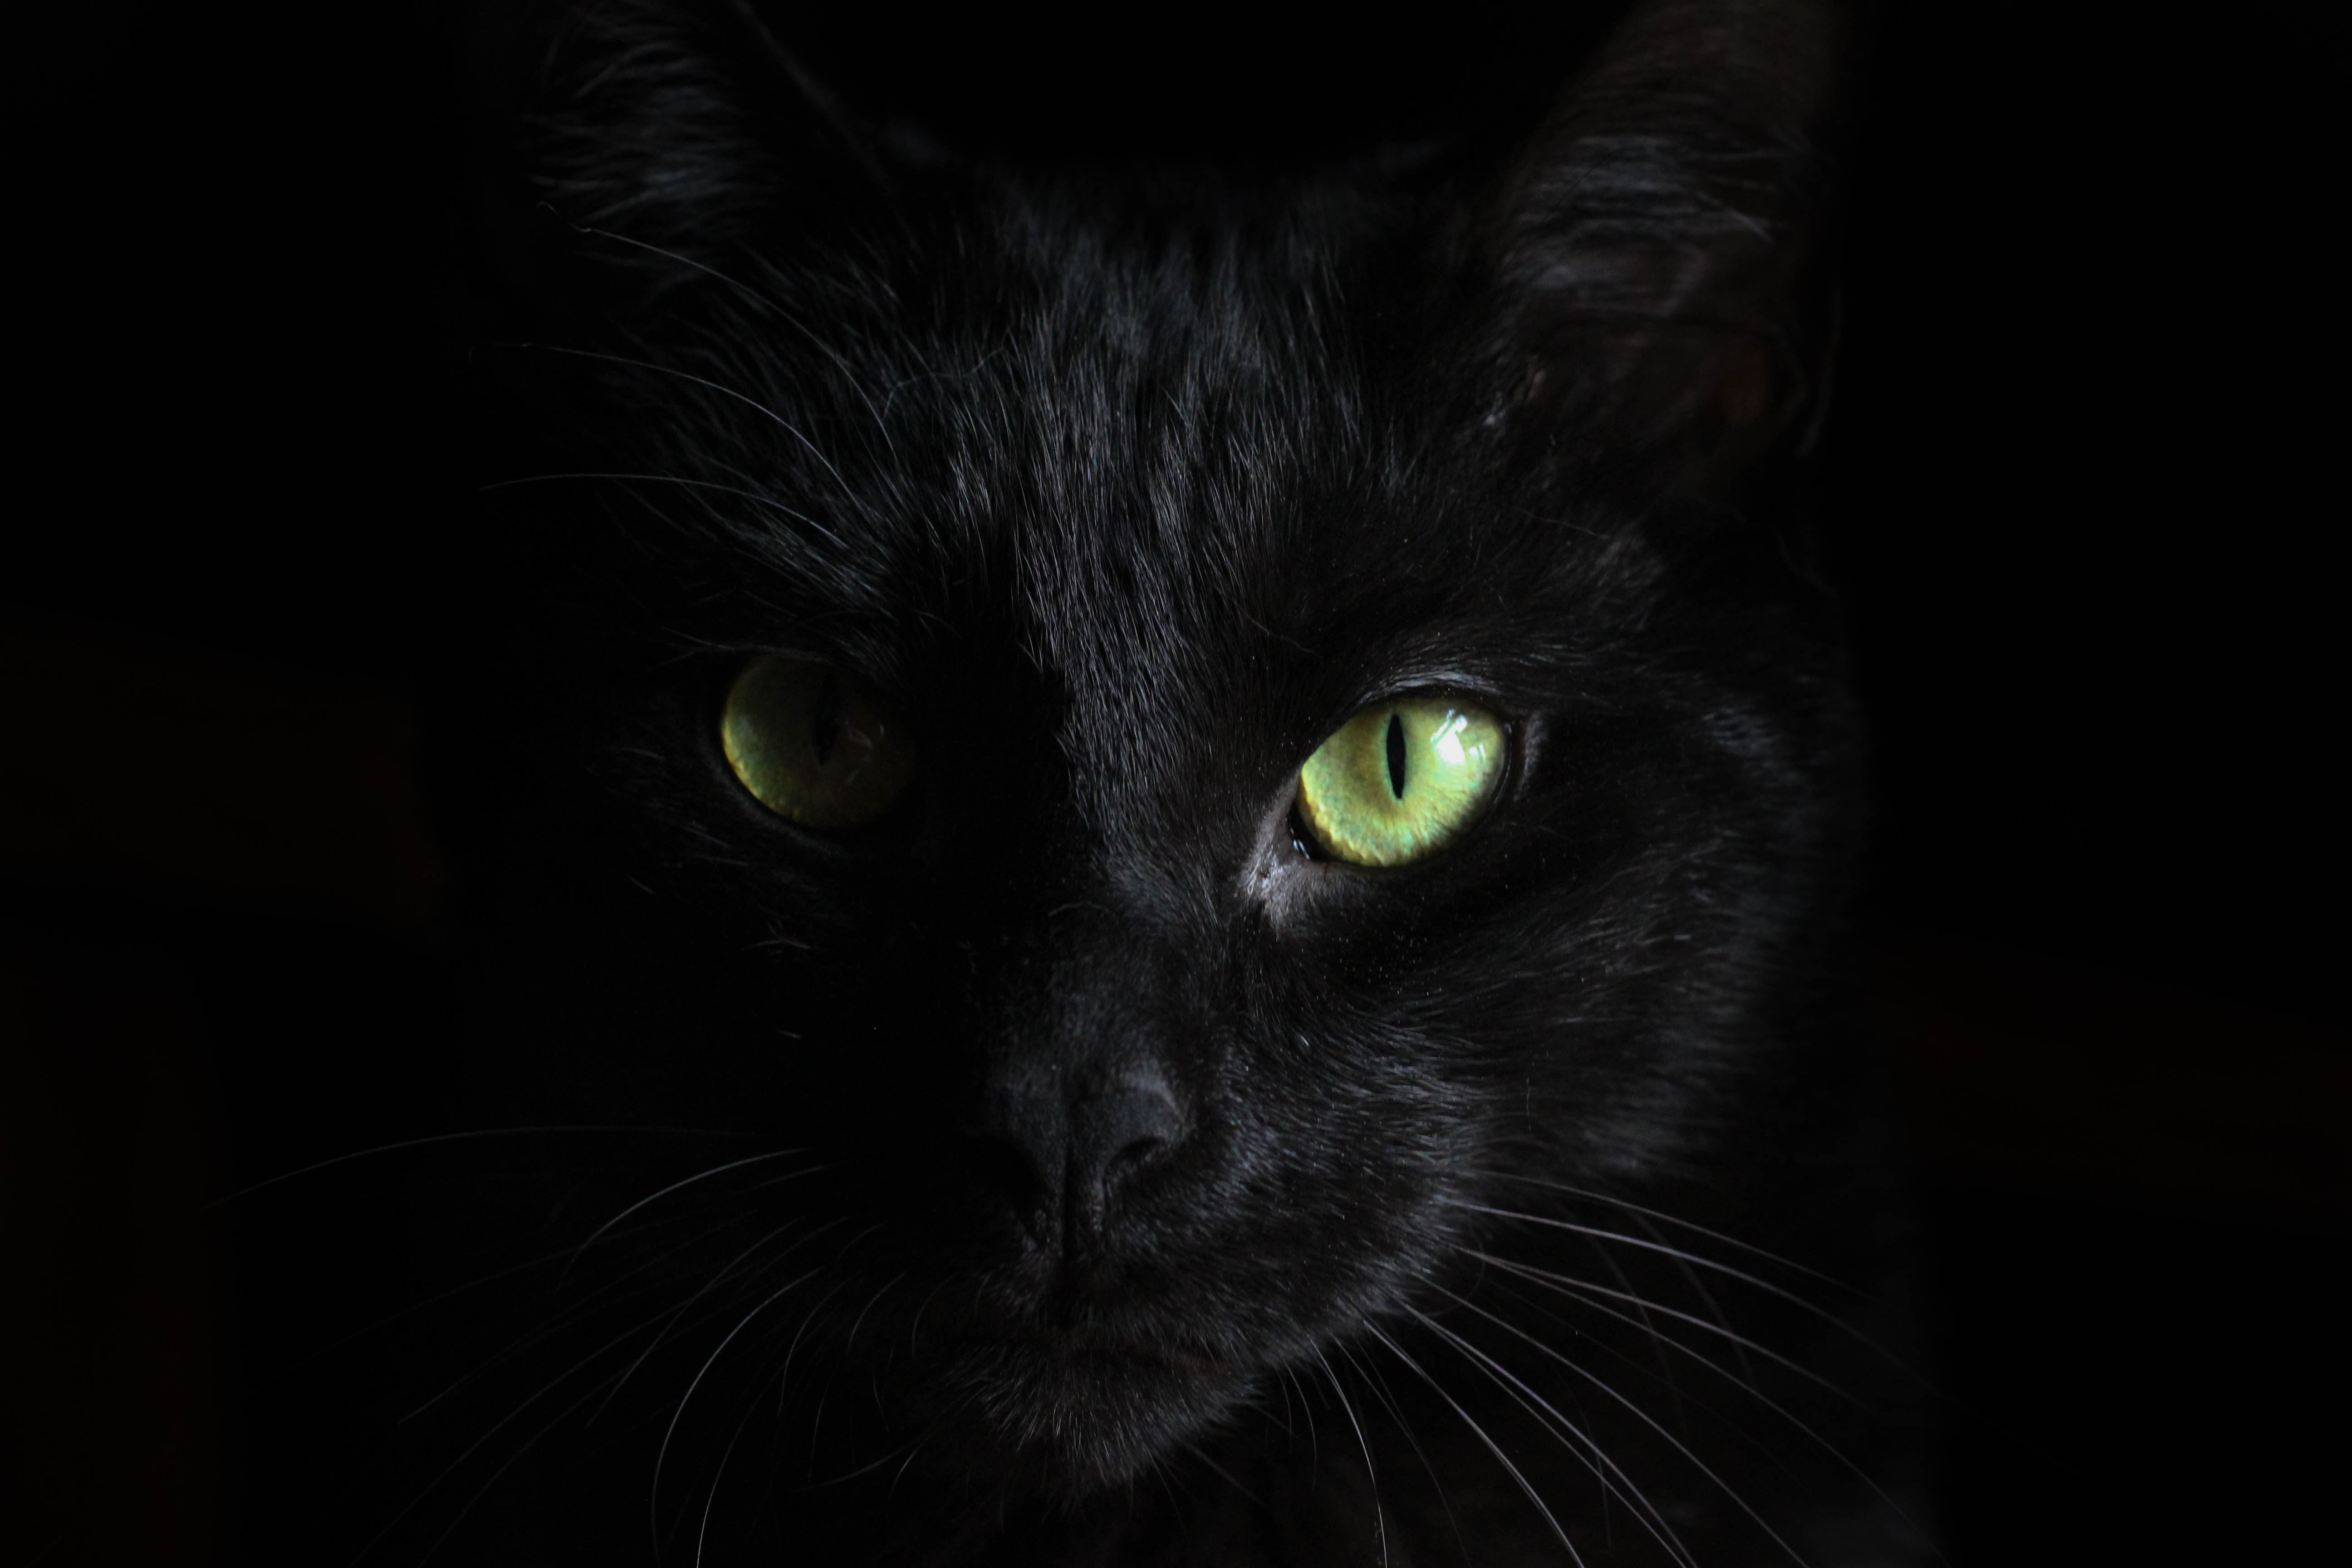 muzzle, opinion, animals, black cat New Lock Screen Backgrounds